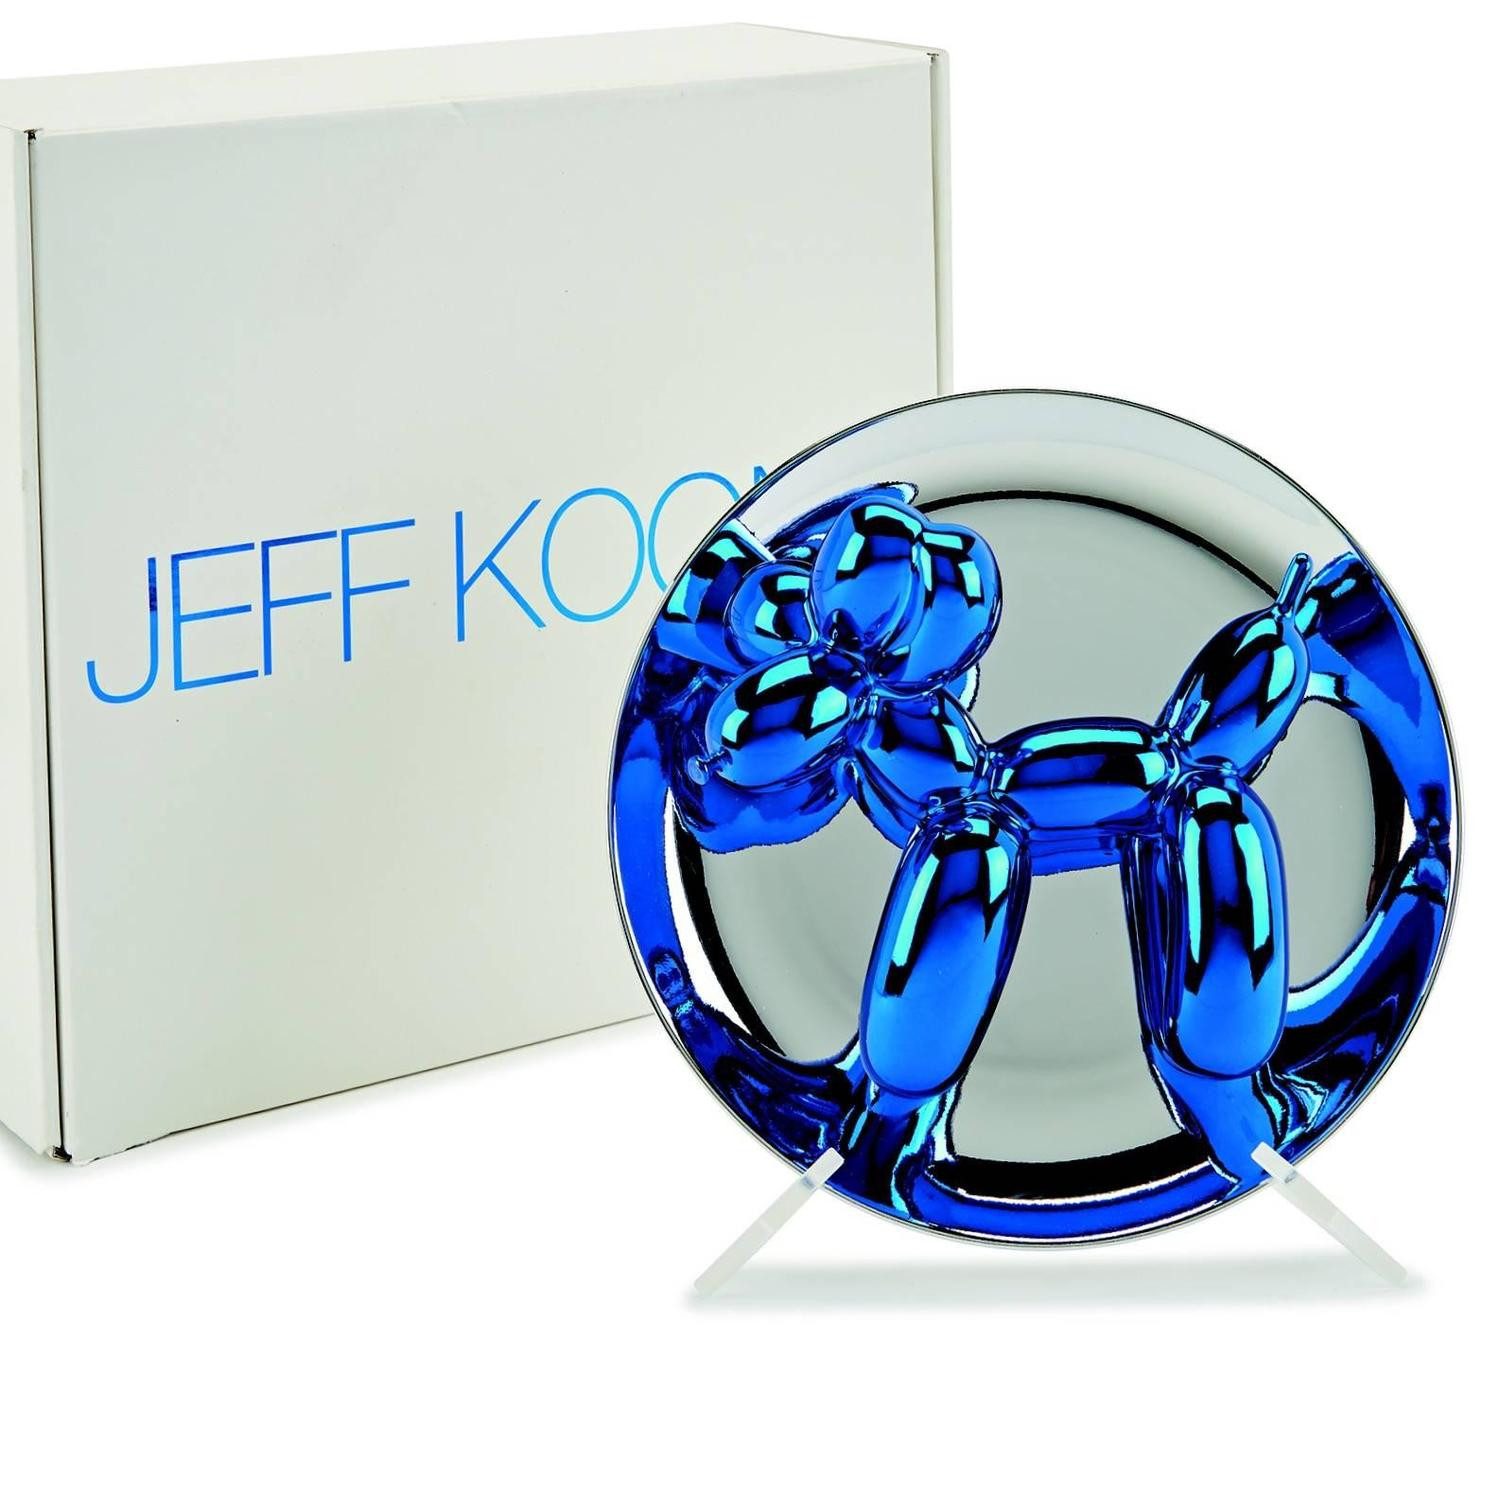 18 Stylish Jeff Koons Puppy Vase Price 2024 free download jeff koons puppy vase price of jeff koons sculptures 23 for sale at 1stdibs throughout jeff koons